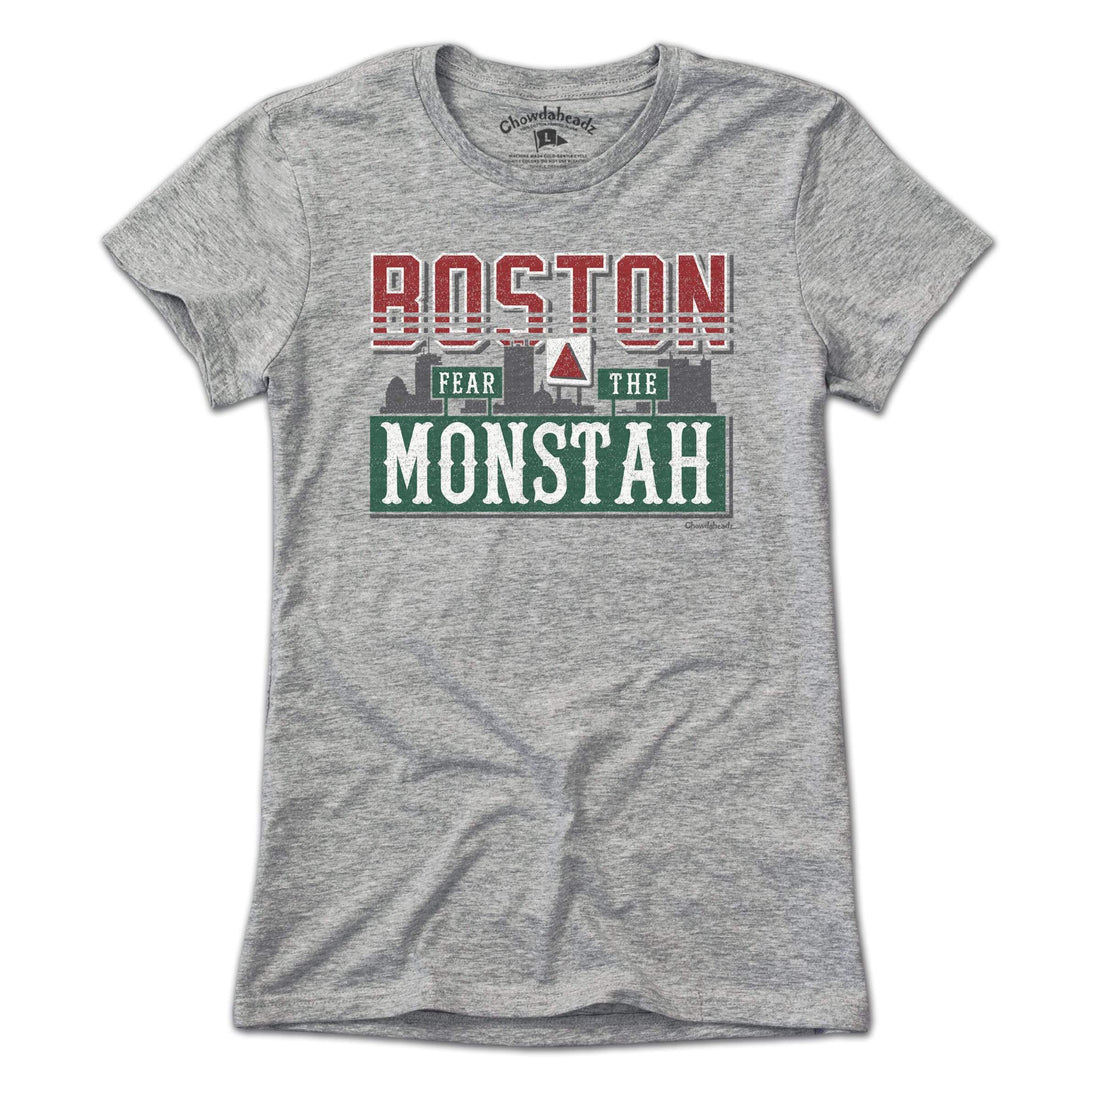 Official Fear the green monster Boston red sox T-shirt, hoodie